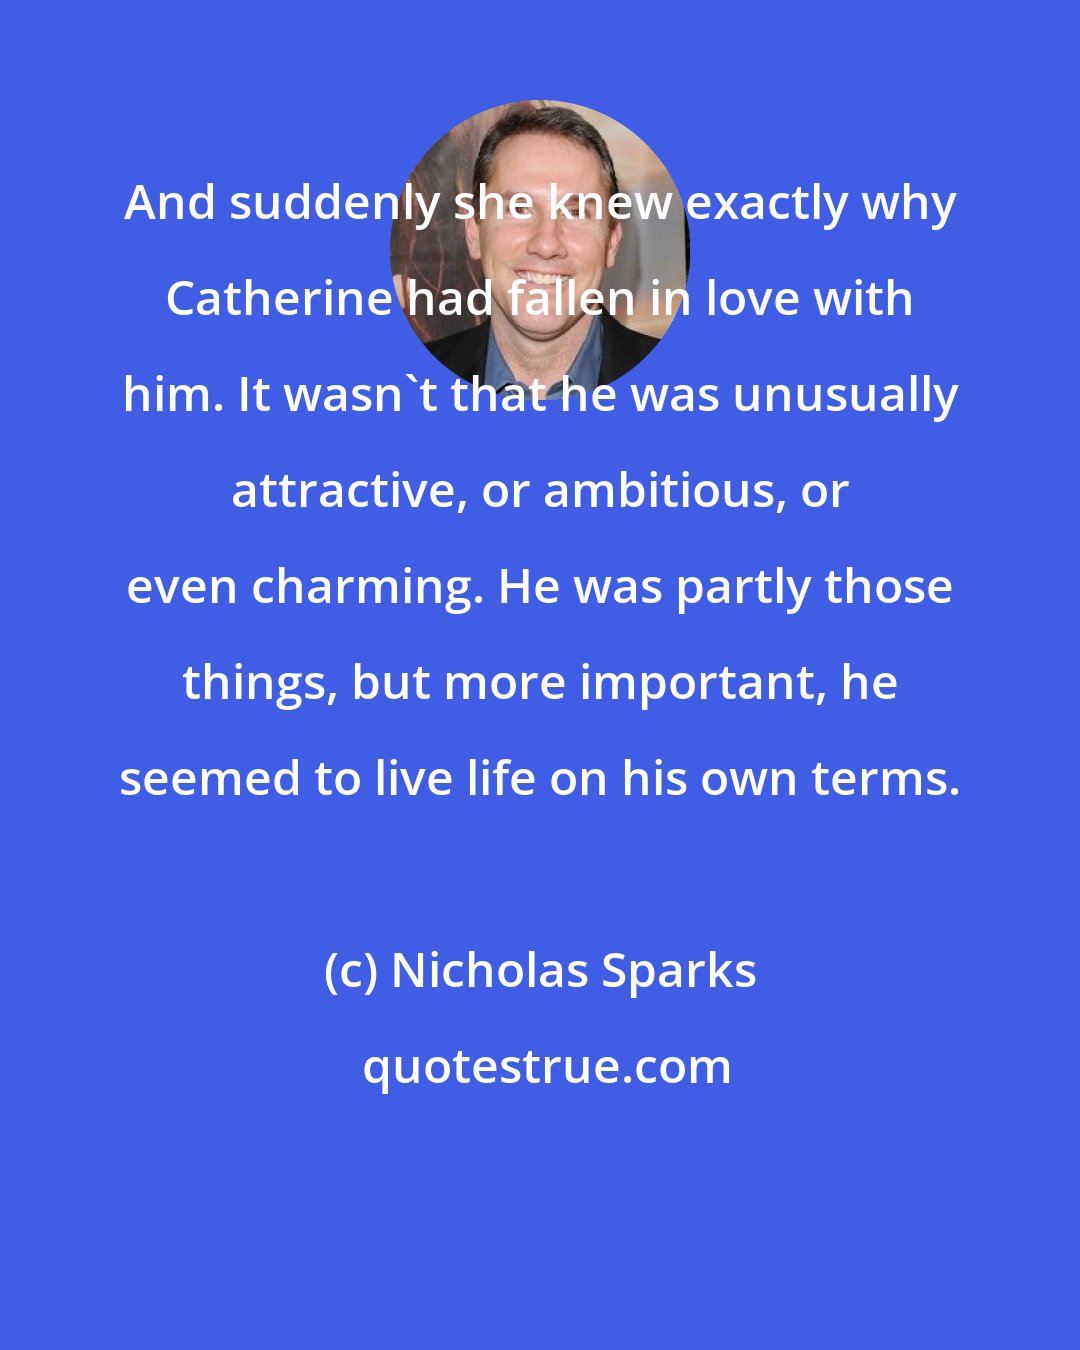 Nicholas Sparks: And suddenly she knew exactly why Catherine had fallen in love with him. It wasn't that he was unusually attractive, or ambitious, or even charming. He was partly those things, but more important, he seemed to live life on his own terms.